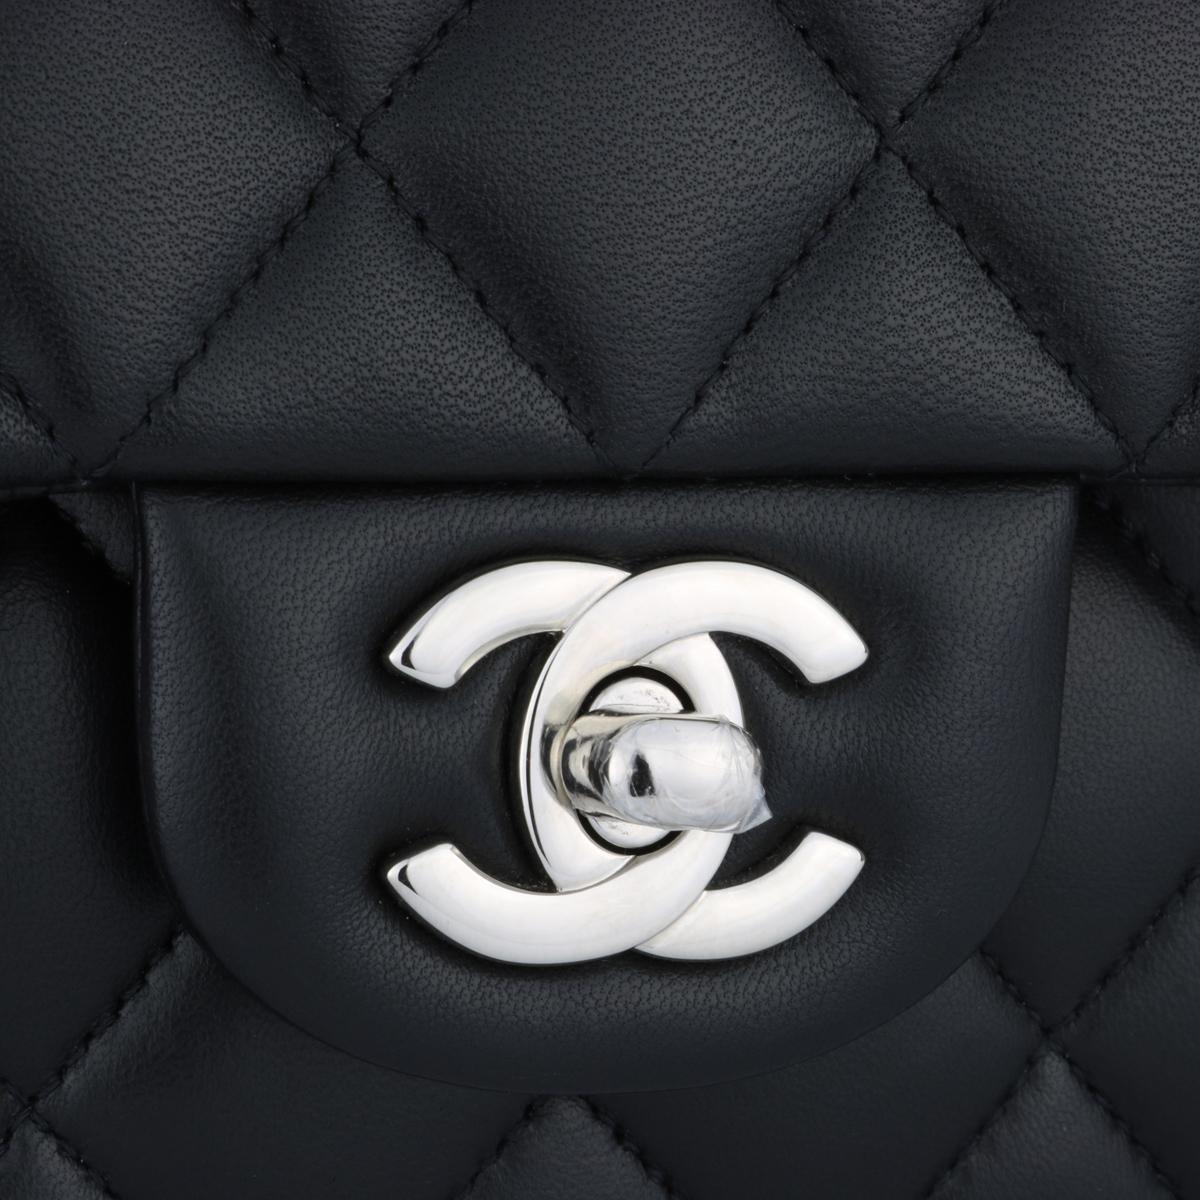 Authentic CHANEL Classic Double Flap Bag Medium Black Lambskin with Silver Hardware 2019.

This stunning bag is still in brand new condition, the bag still holds its original shape, and the hardware is very shiny. Leather still smells fresh as if